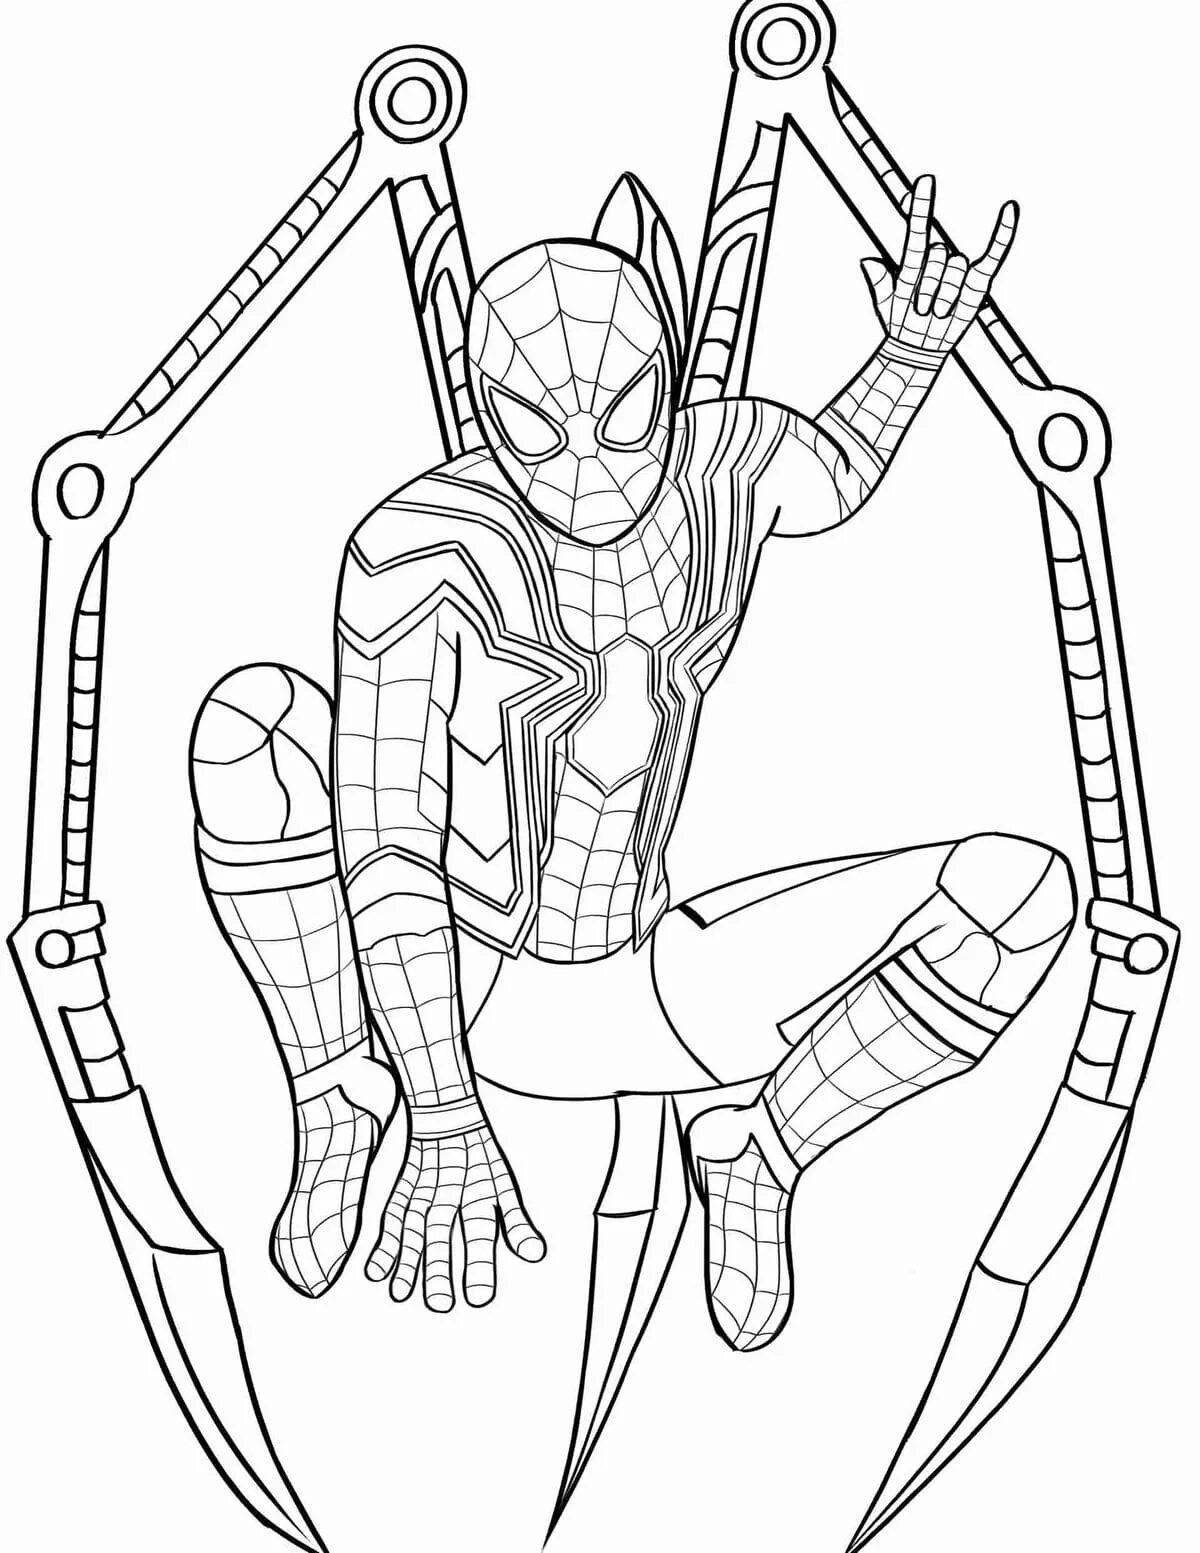 Intriguing Spiderman team coloring page